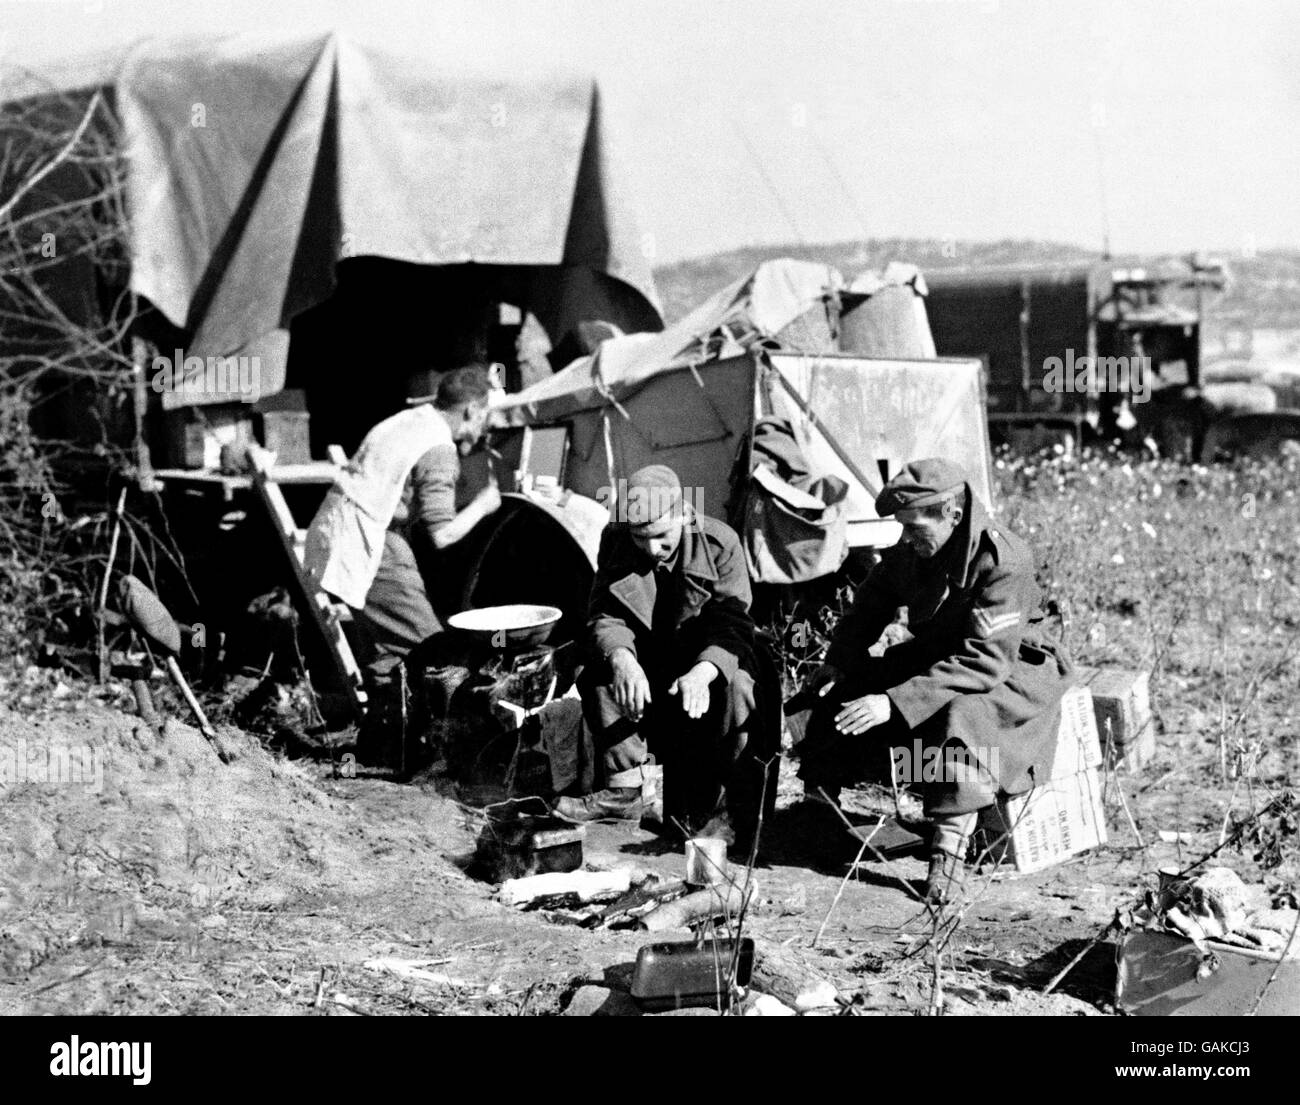 Home away from home for these British soldiers in Korea, the lorry was parked on a piece of flat ground somewhere near the front lines. Private Jones of the Cheltenham (center) and Lance Corporal Jones (right) - members of the corps of the Royal Signals - warm their hands at the fire used to prepare their meal, while Driver Brockman of Canterbury shaves. Stock Photo